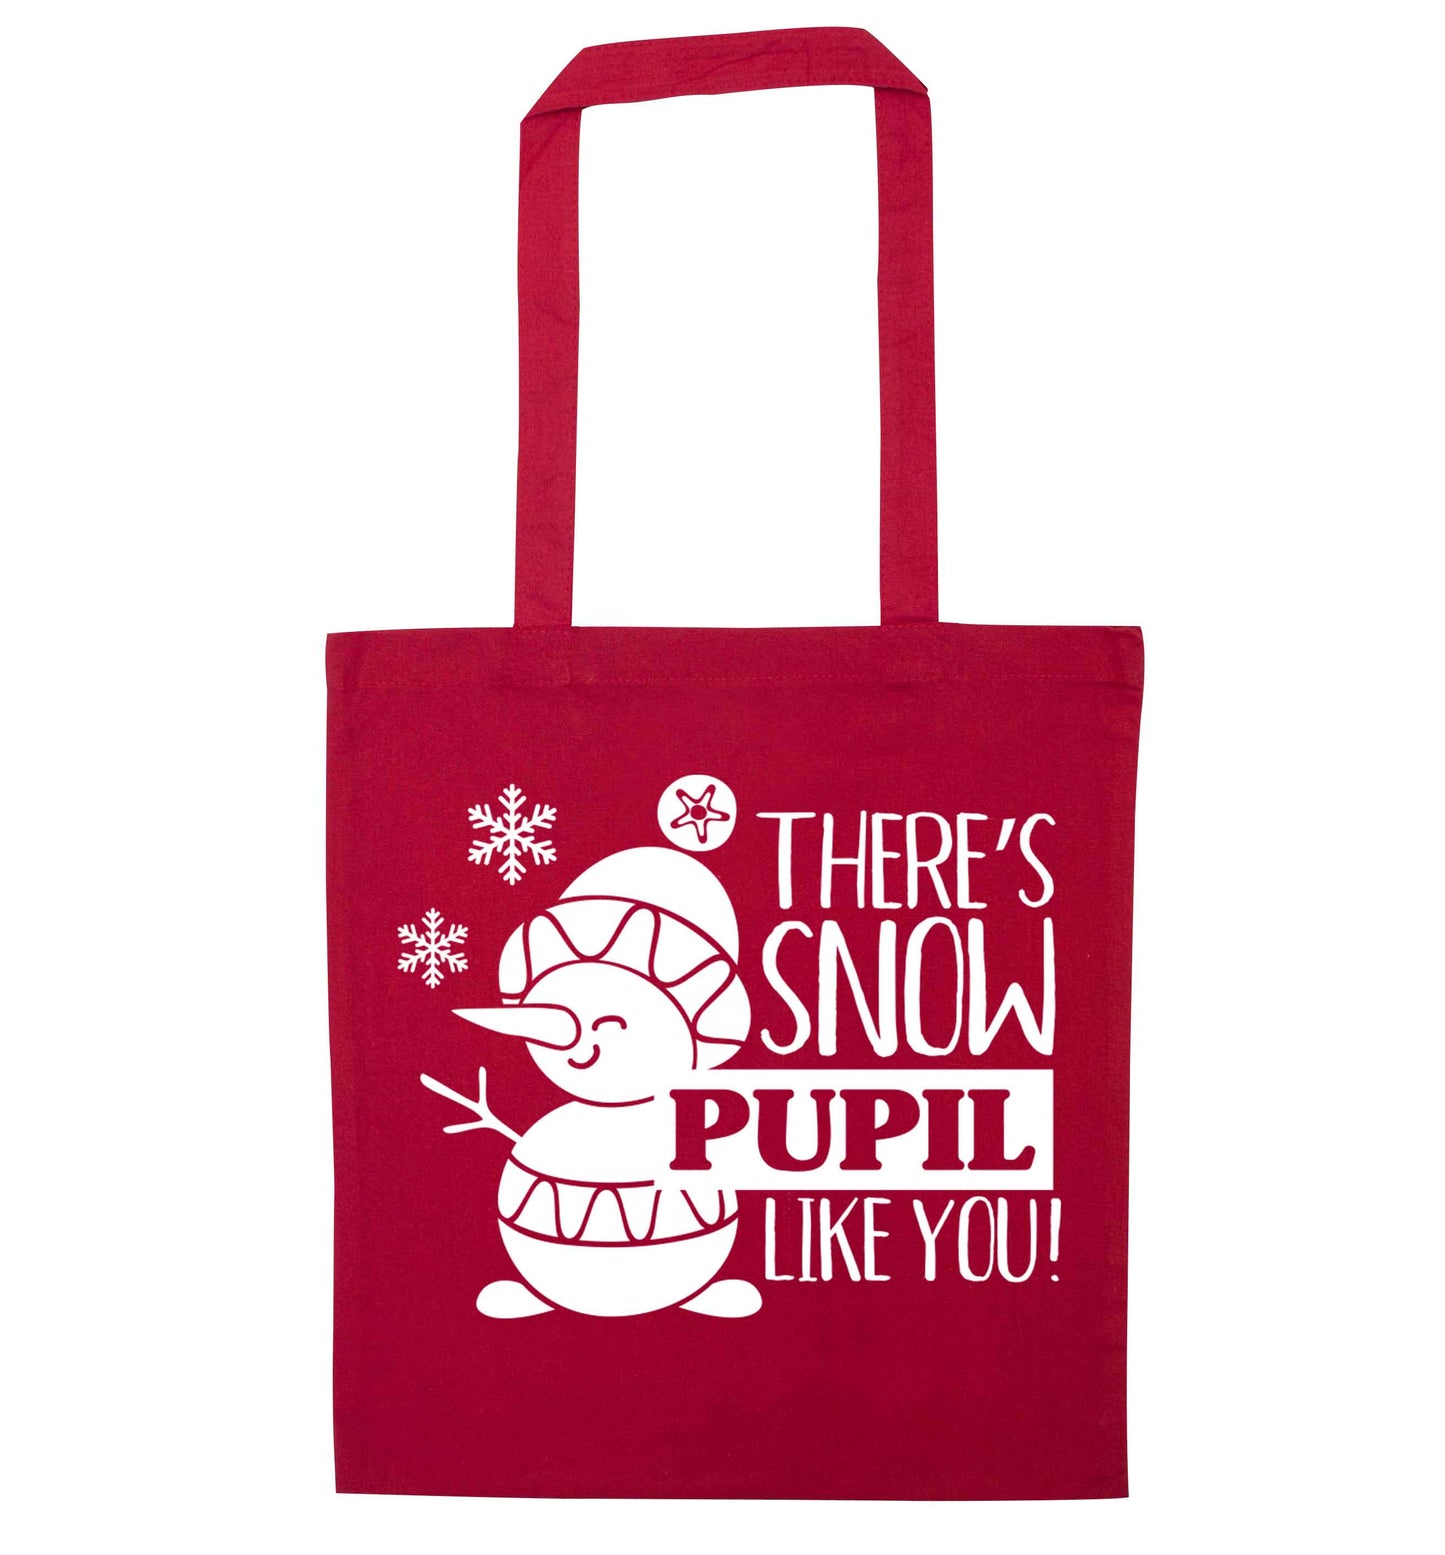 There's snow pupil like you red tote bag